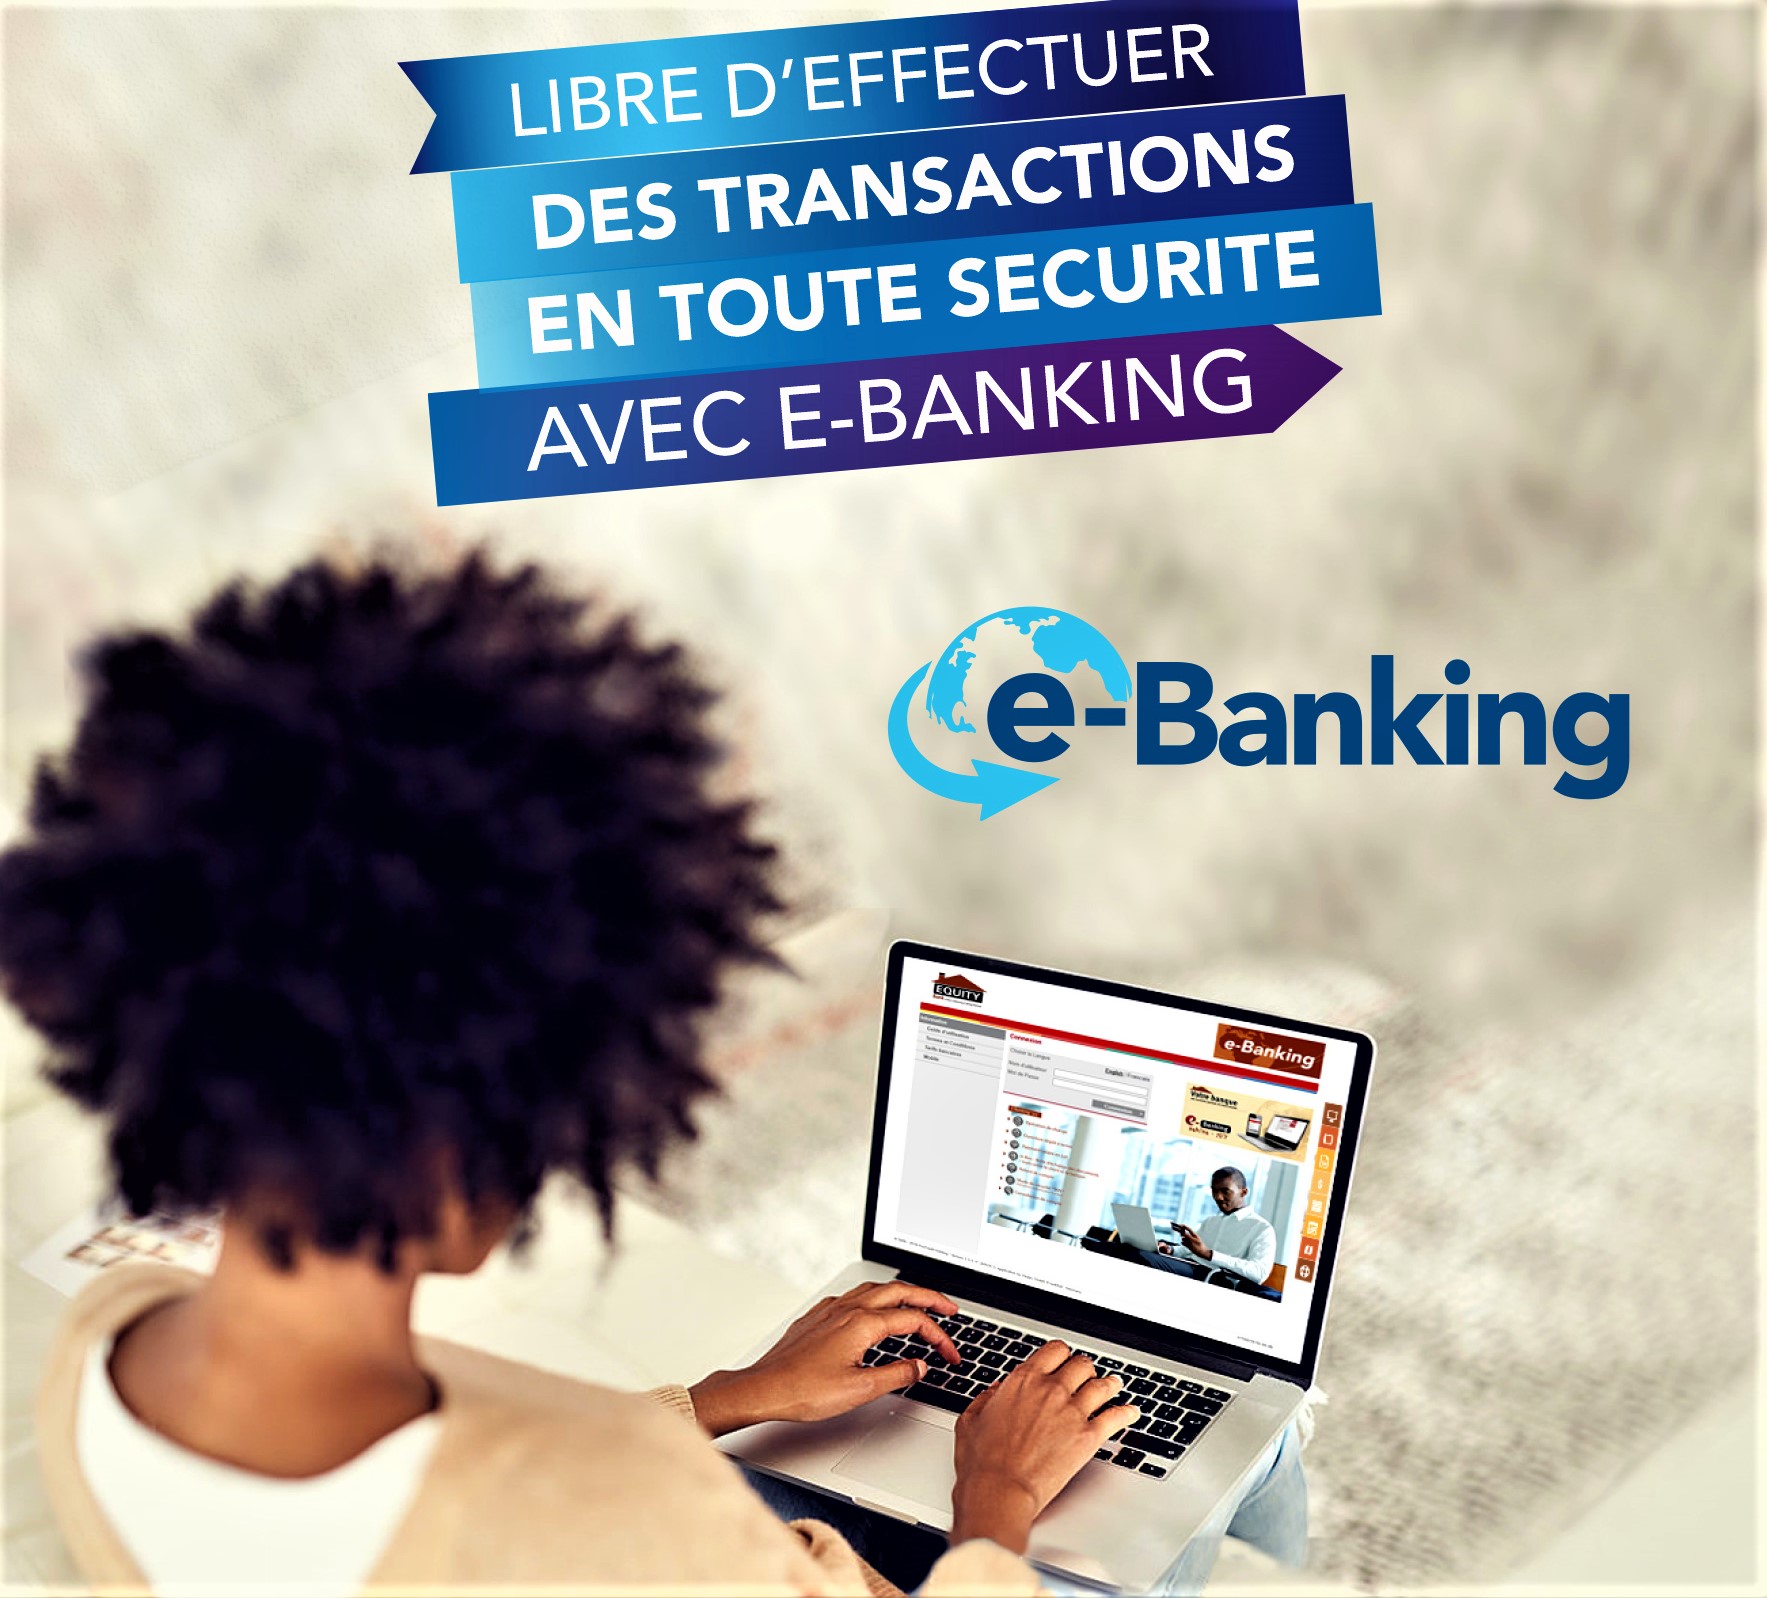 DRC: e-Banking, easy and secure online banking with Equity Bank